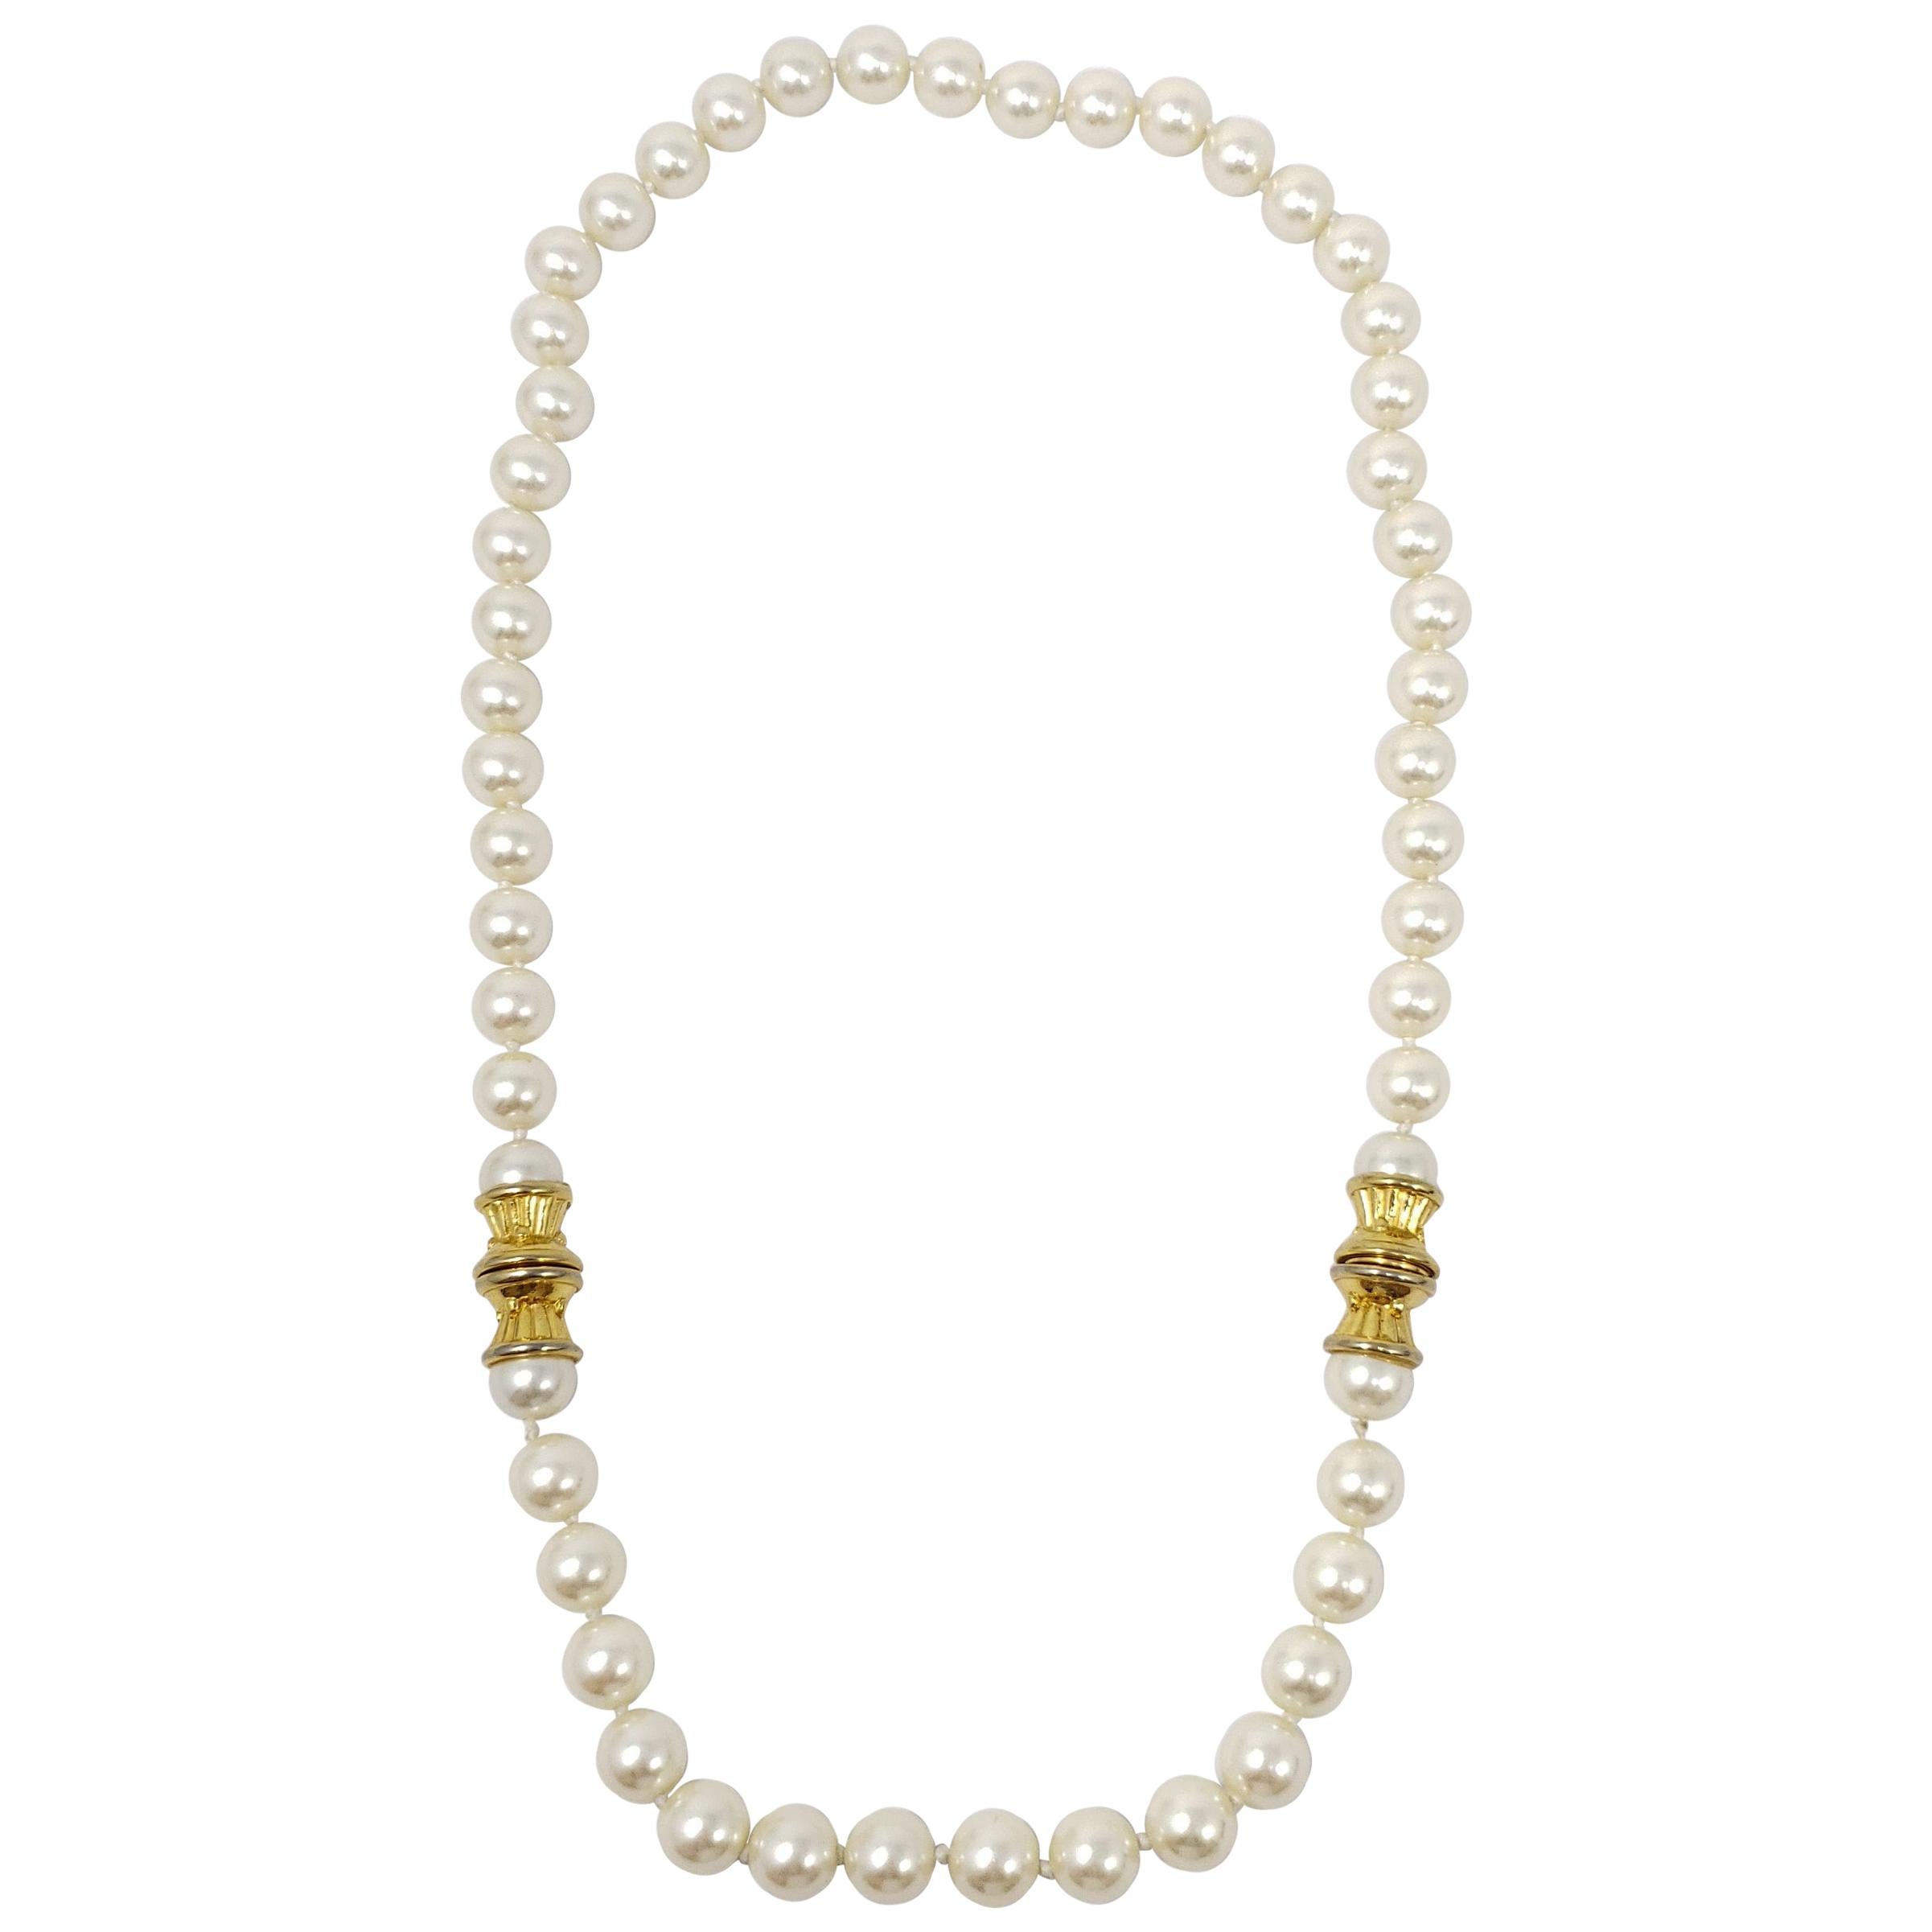 Vintage Faux Pearl Necklace, Gold Accents, Mid 1900s, 22 Inches